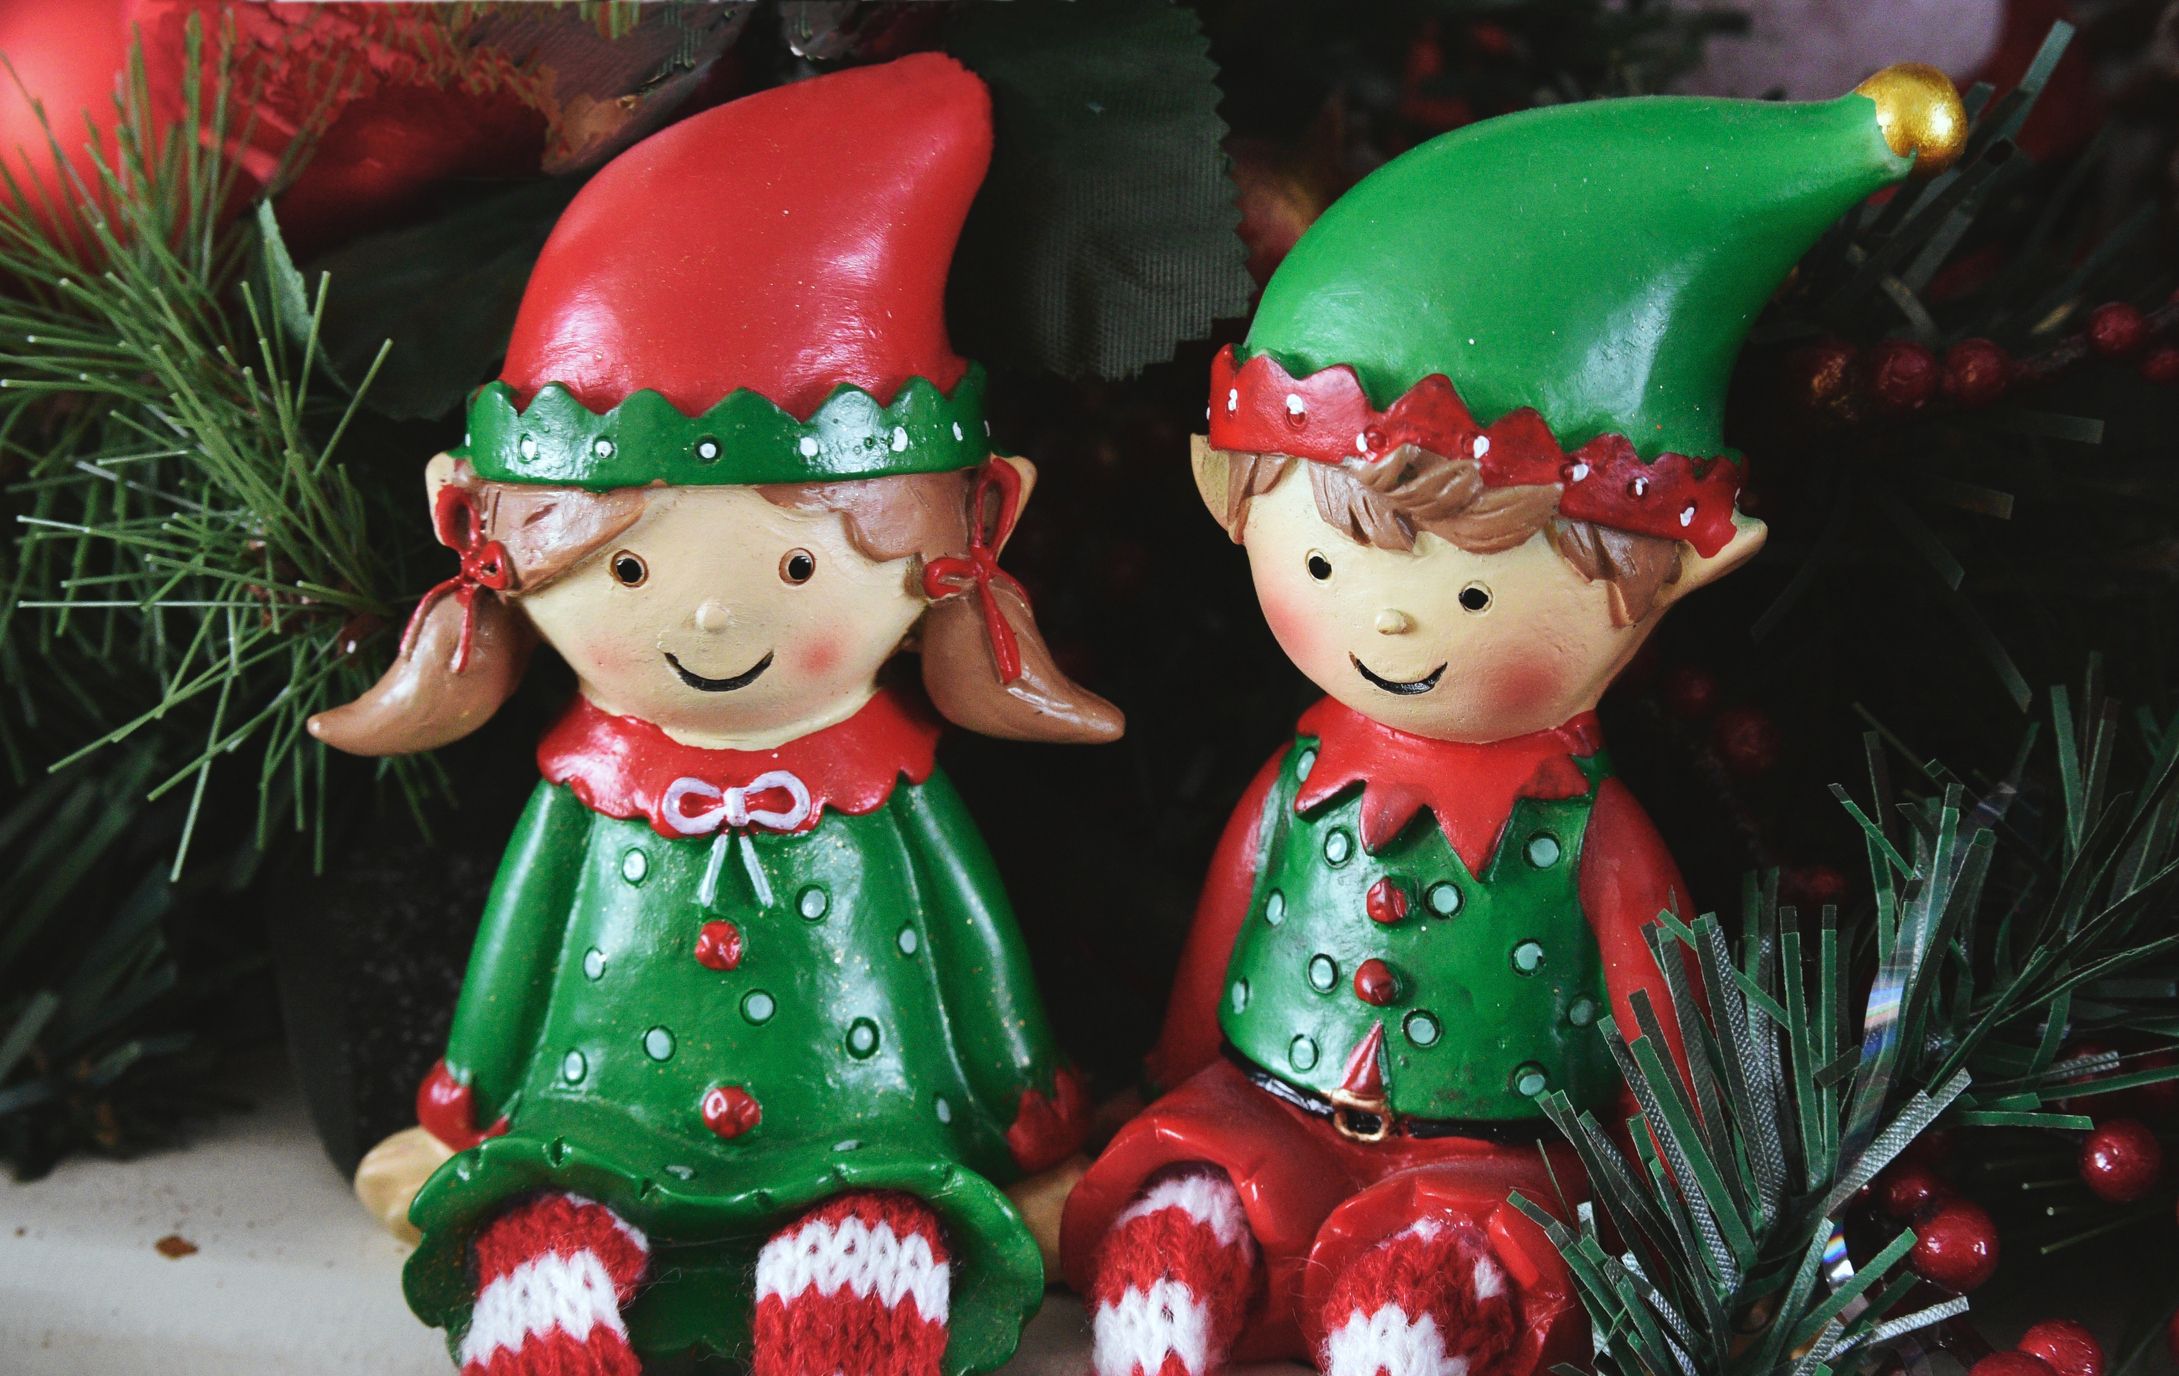 On Elf On The Shelf: how much truth do our kids really need?